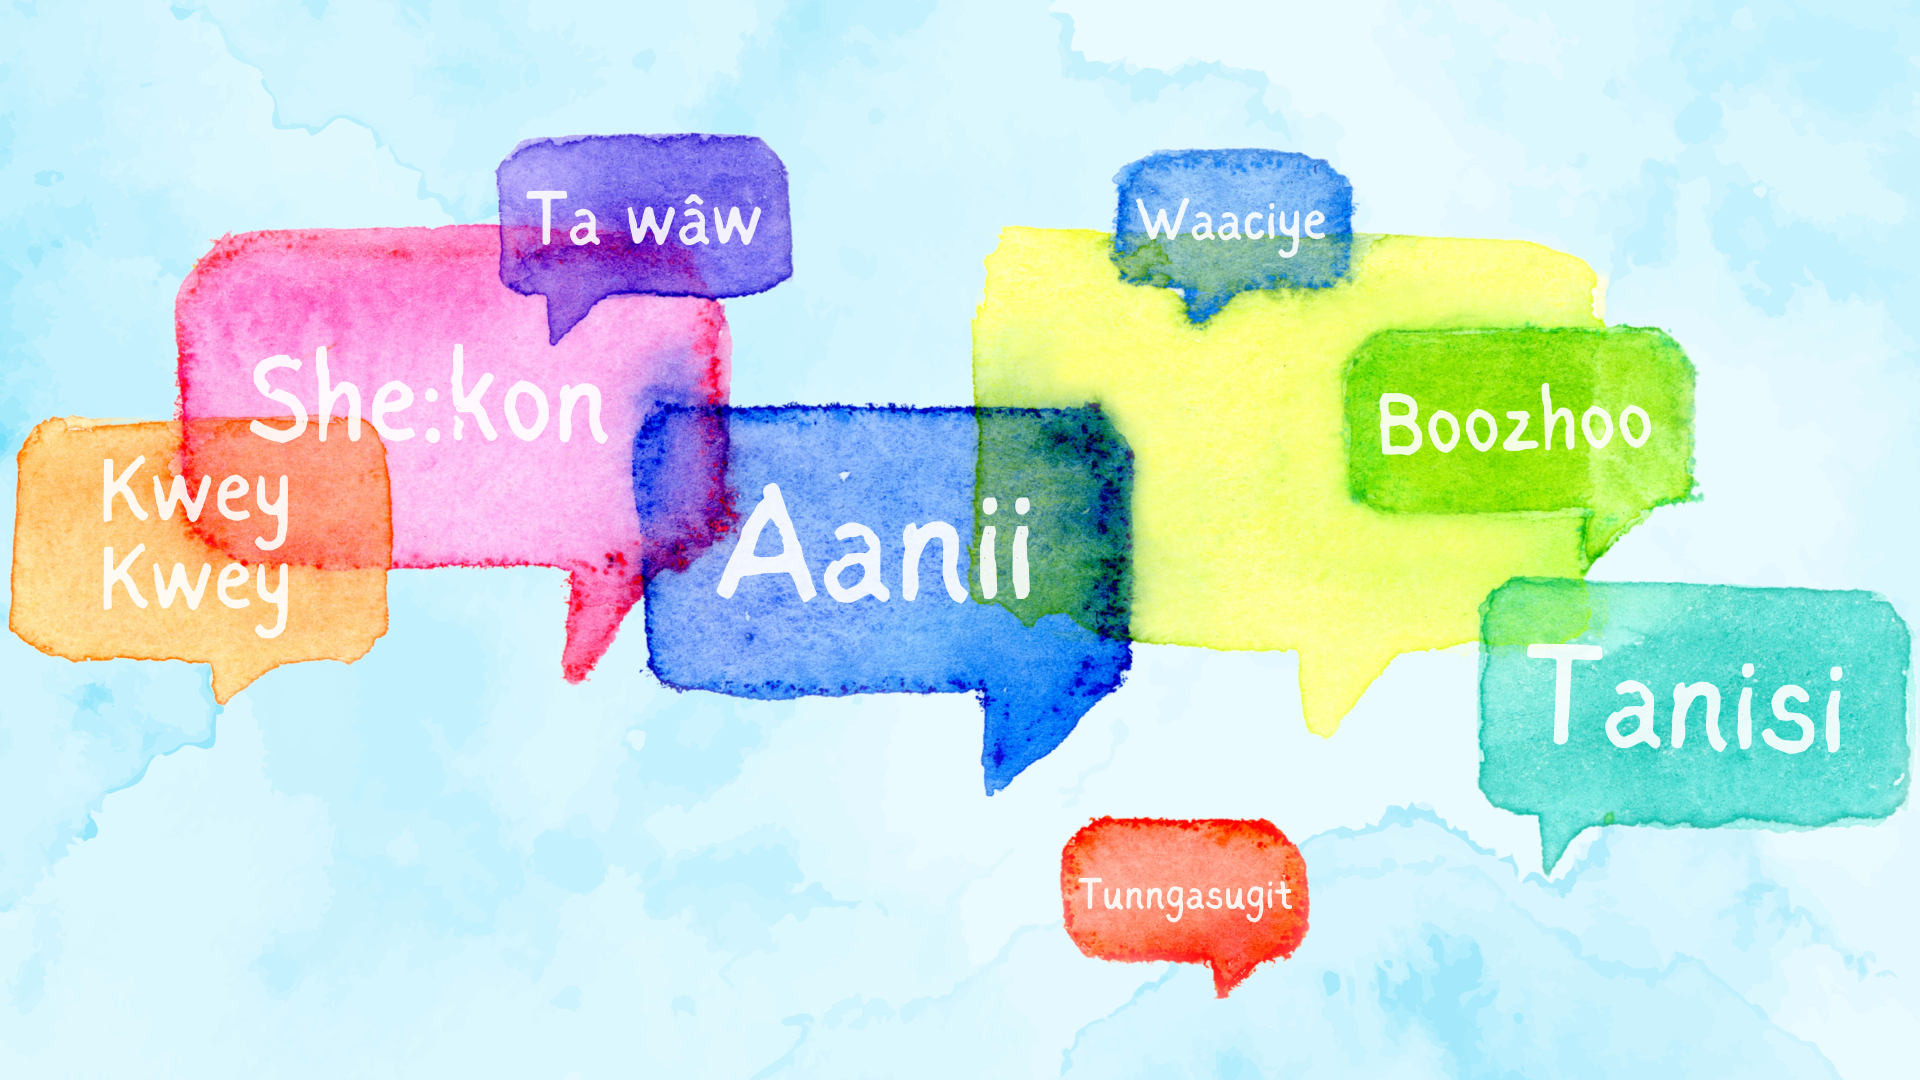 Greetings in different Indigenous languages across water-colour speech bubbles.